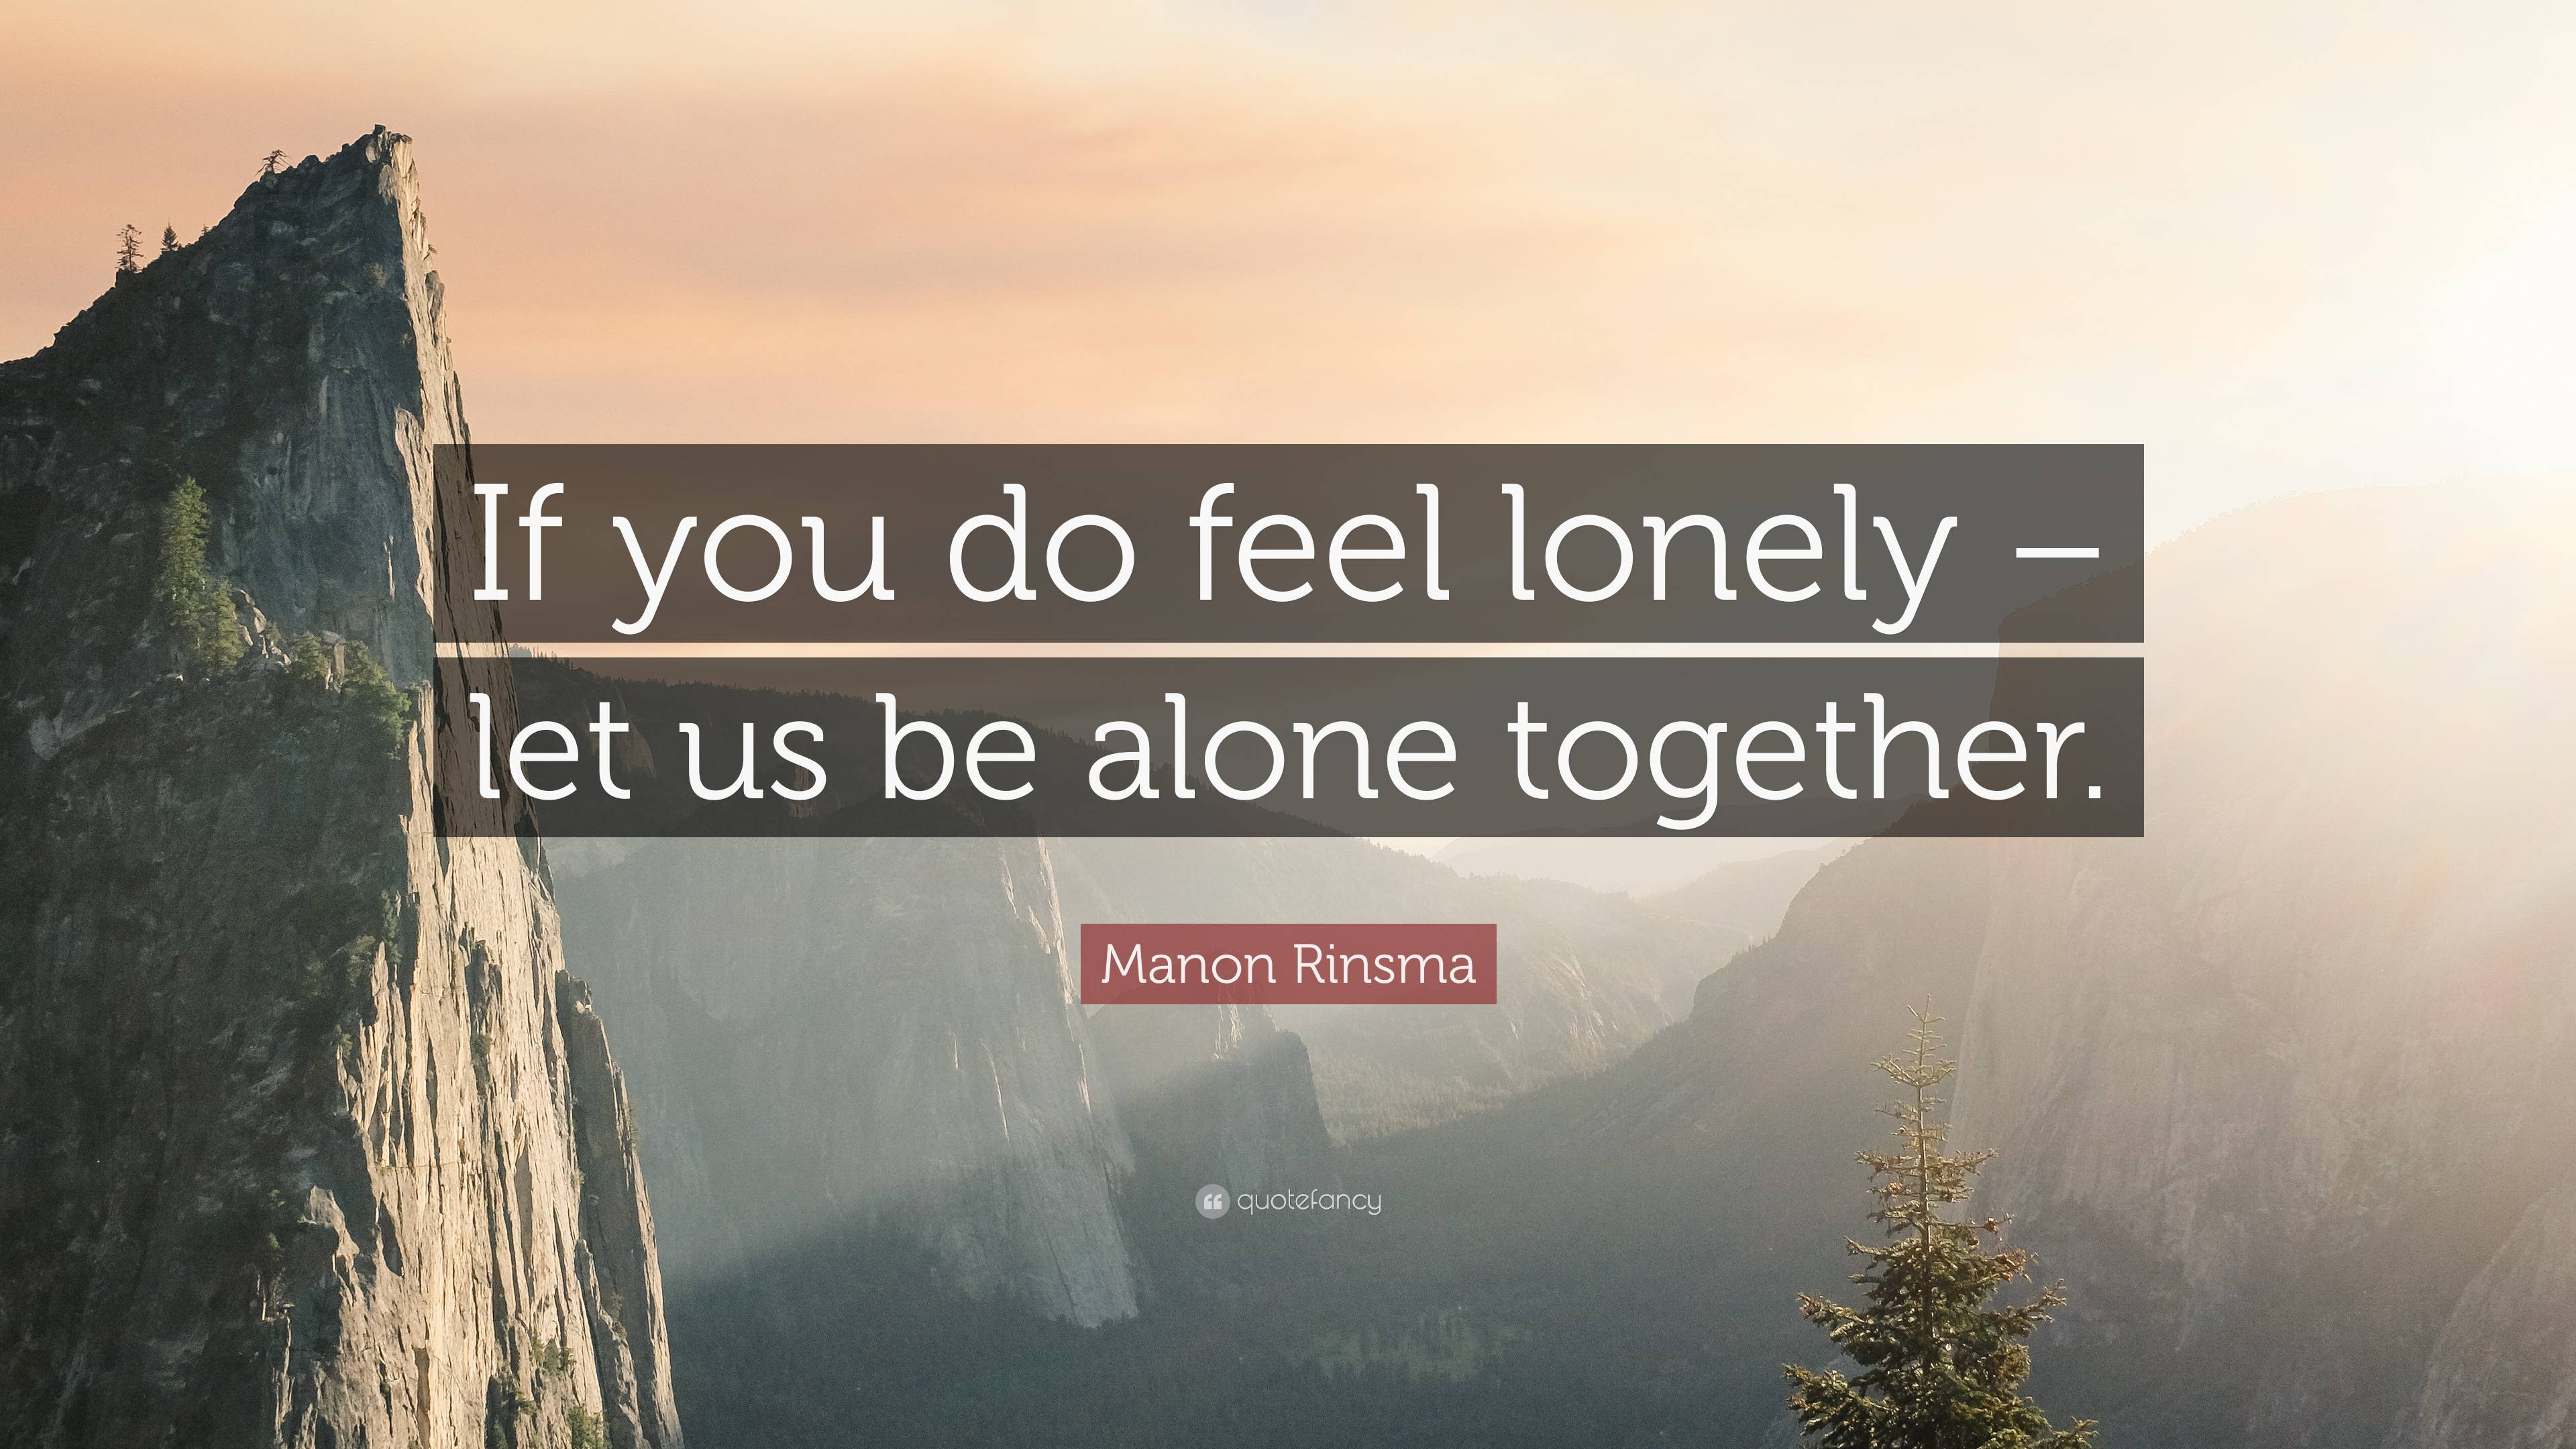 Manon Rinsma Quote: “If you do feel lonely – let us be alone together.”